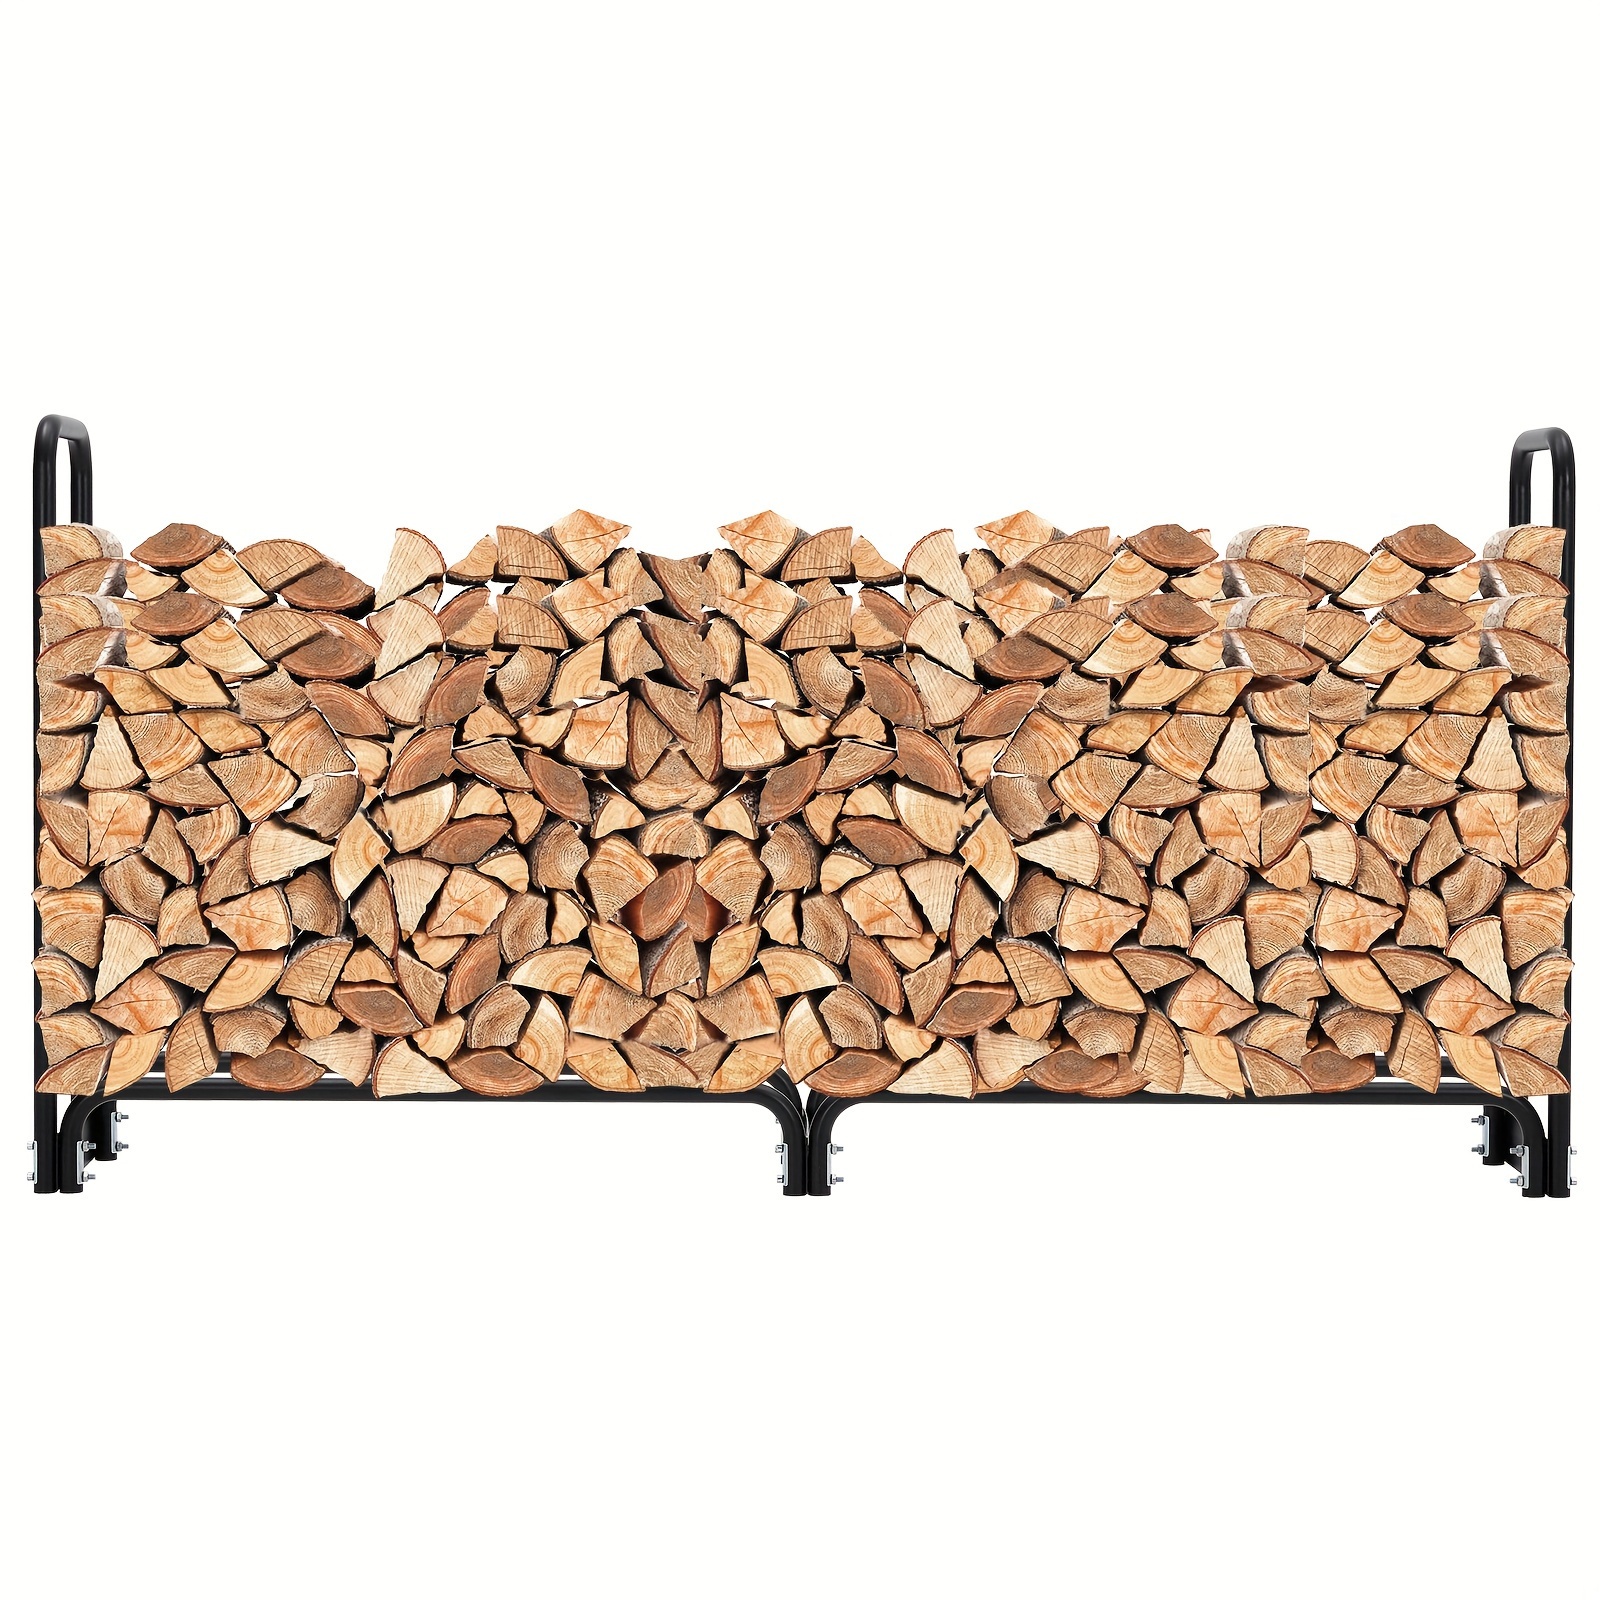 

Firewood Rack Outdoor, 8ft Firewood Rack With Cover For Fireplace Wood Storage, Firewood Holder For Outdoor/indoor With Anti-rust Coating And Waterproof Cover